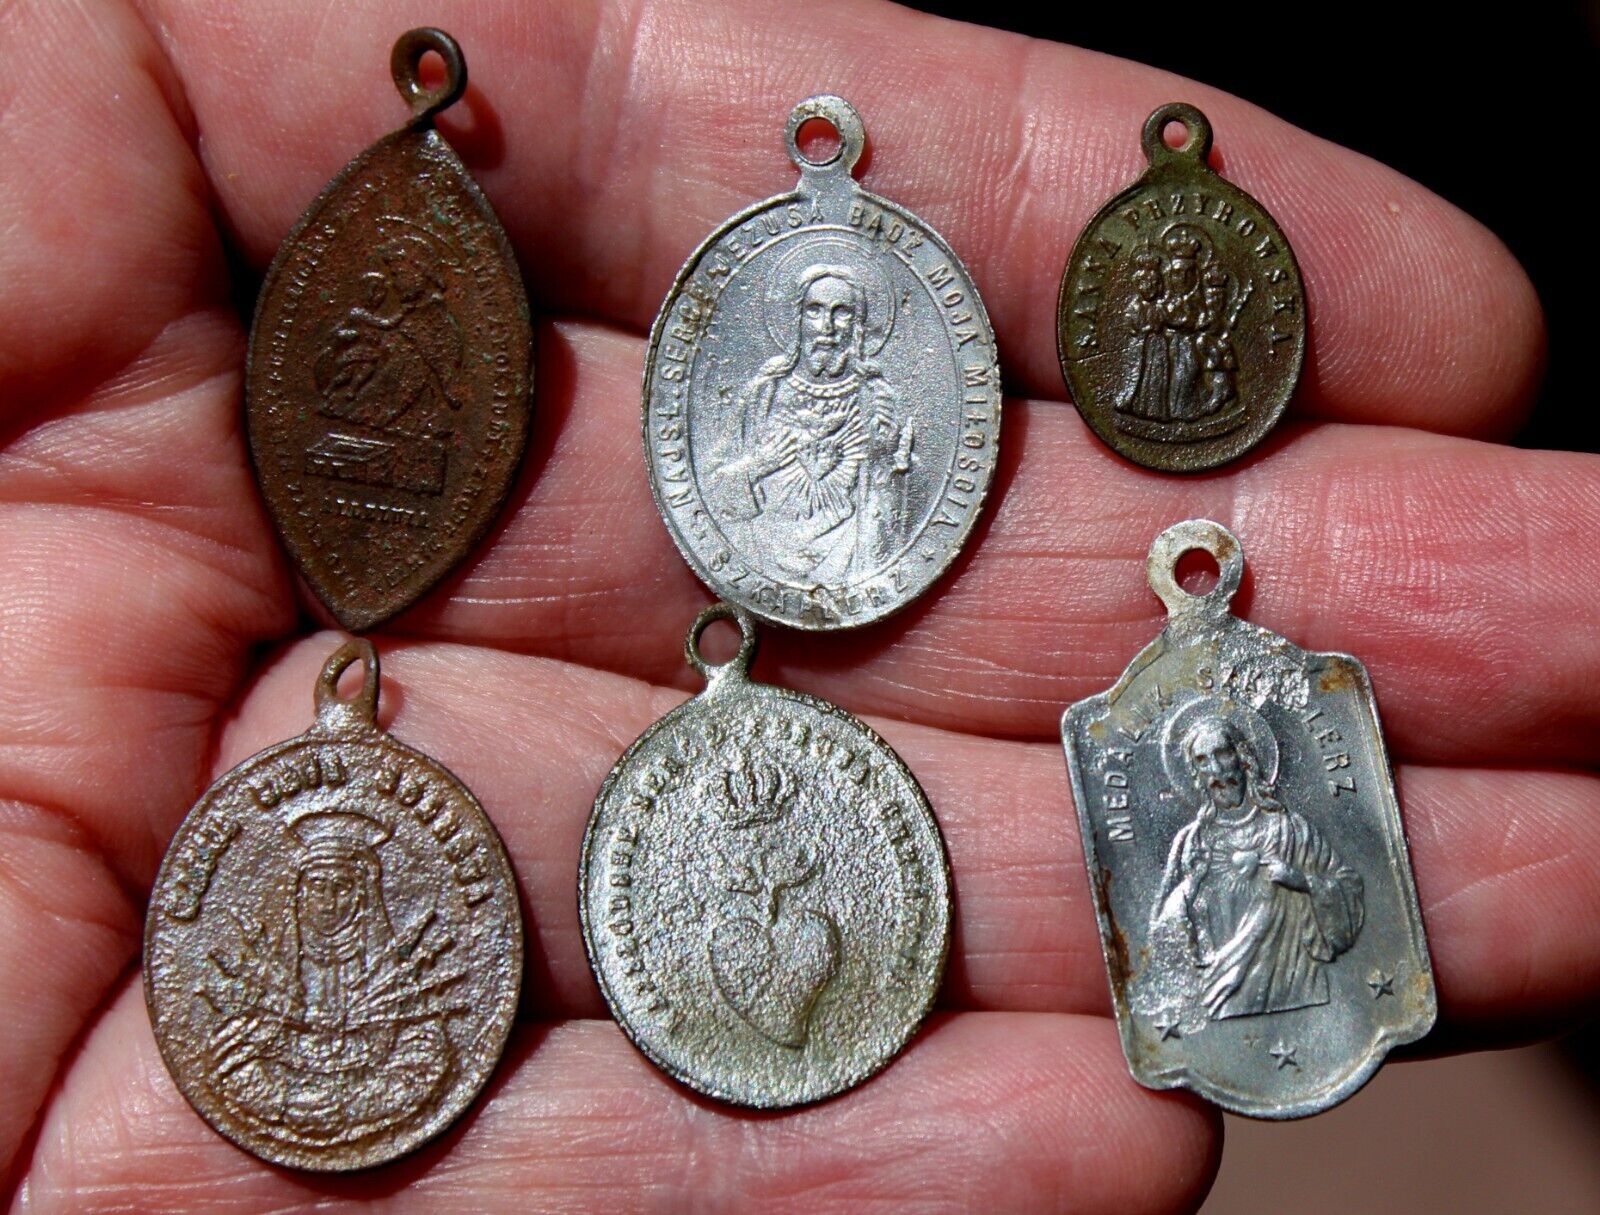 6 Old Different Metals Christian Artifacts Pendants Dug In Latvia Field